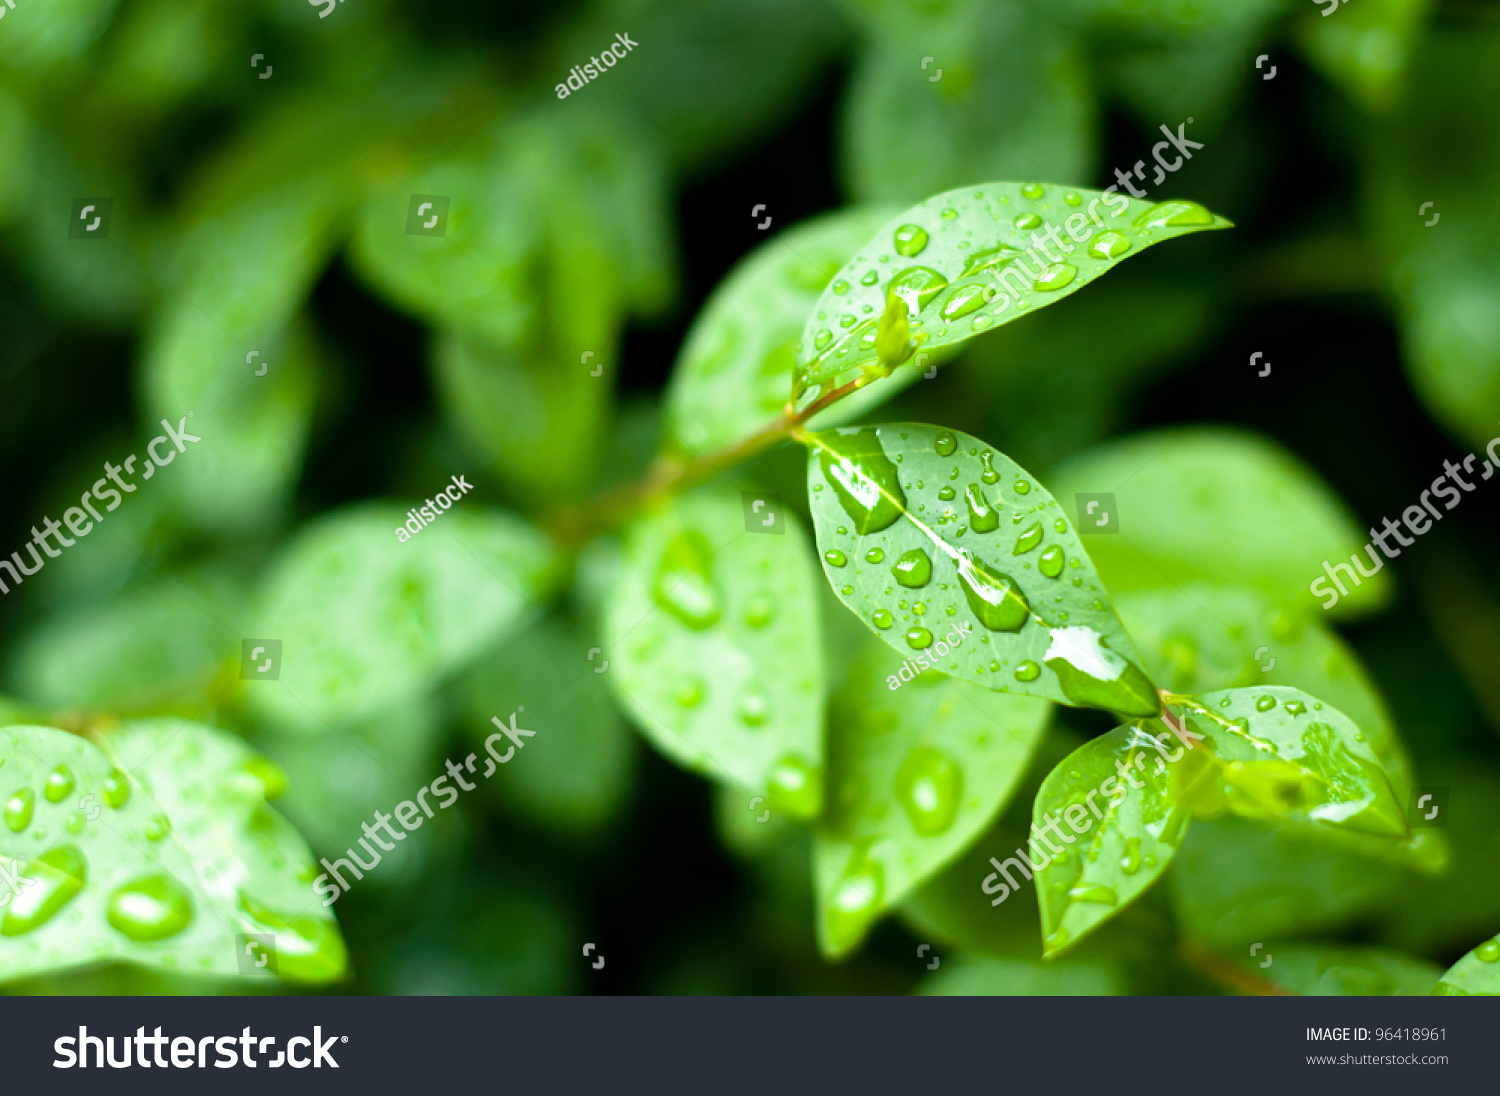 close up of water drops on fresh green leaves background #96418961